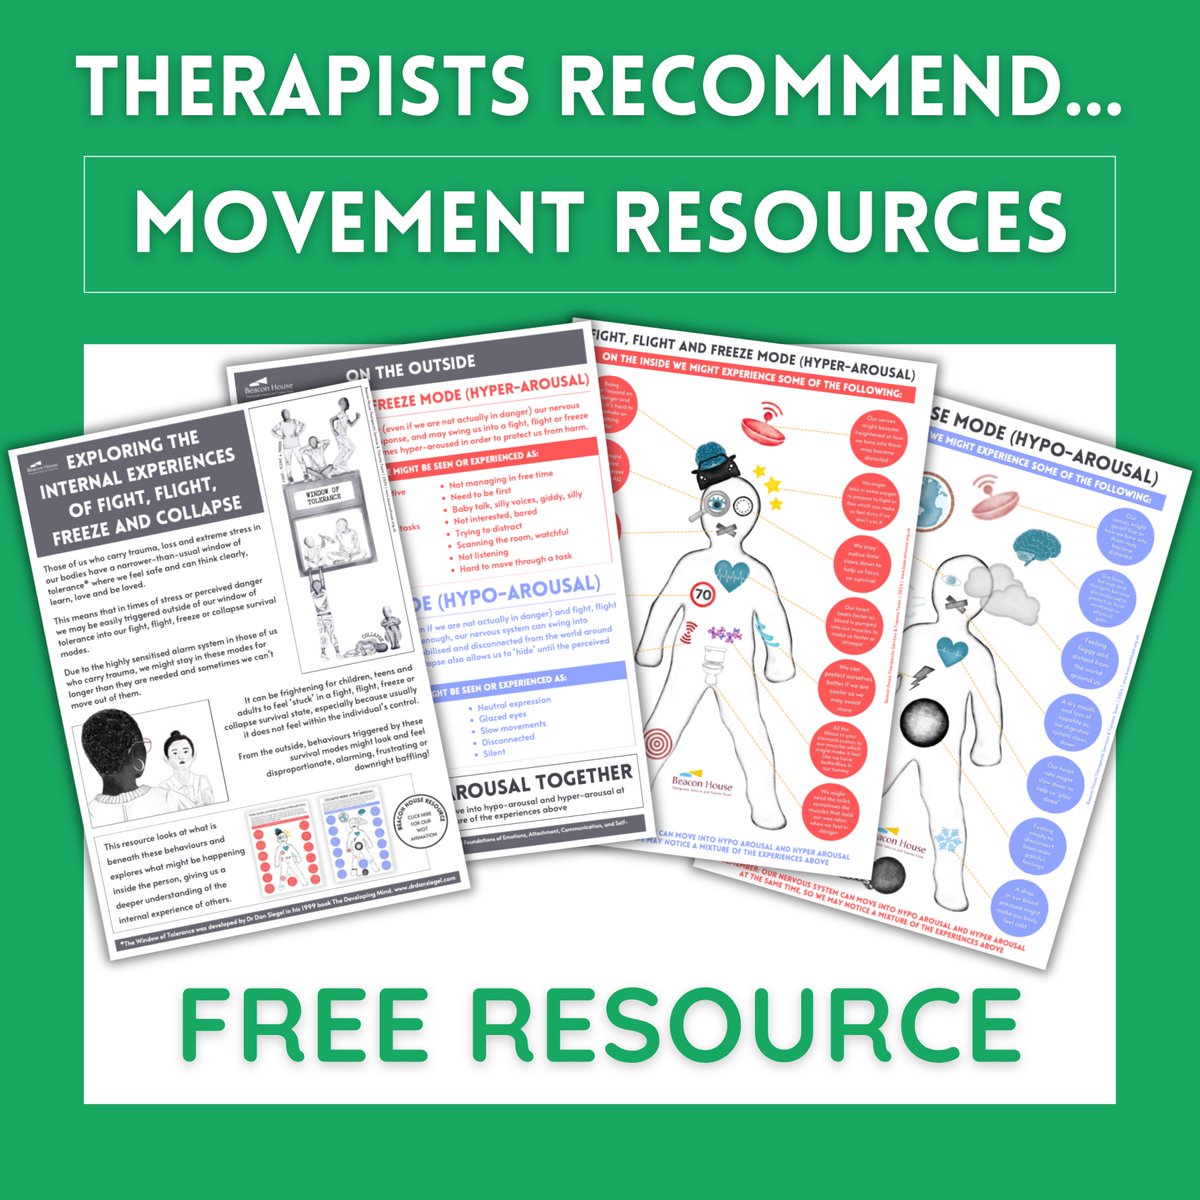 #TherapistsRecommend Free resource exploring the external body experiences of fight, flight, freeze and collapse. Download here: beaconhouse.org.uk/resources